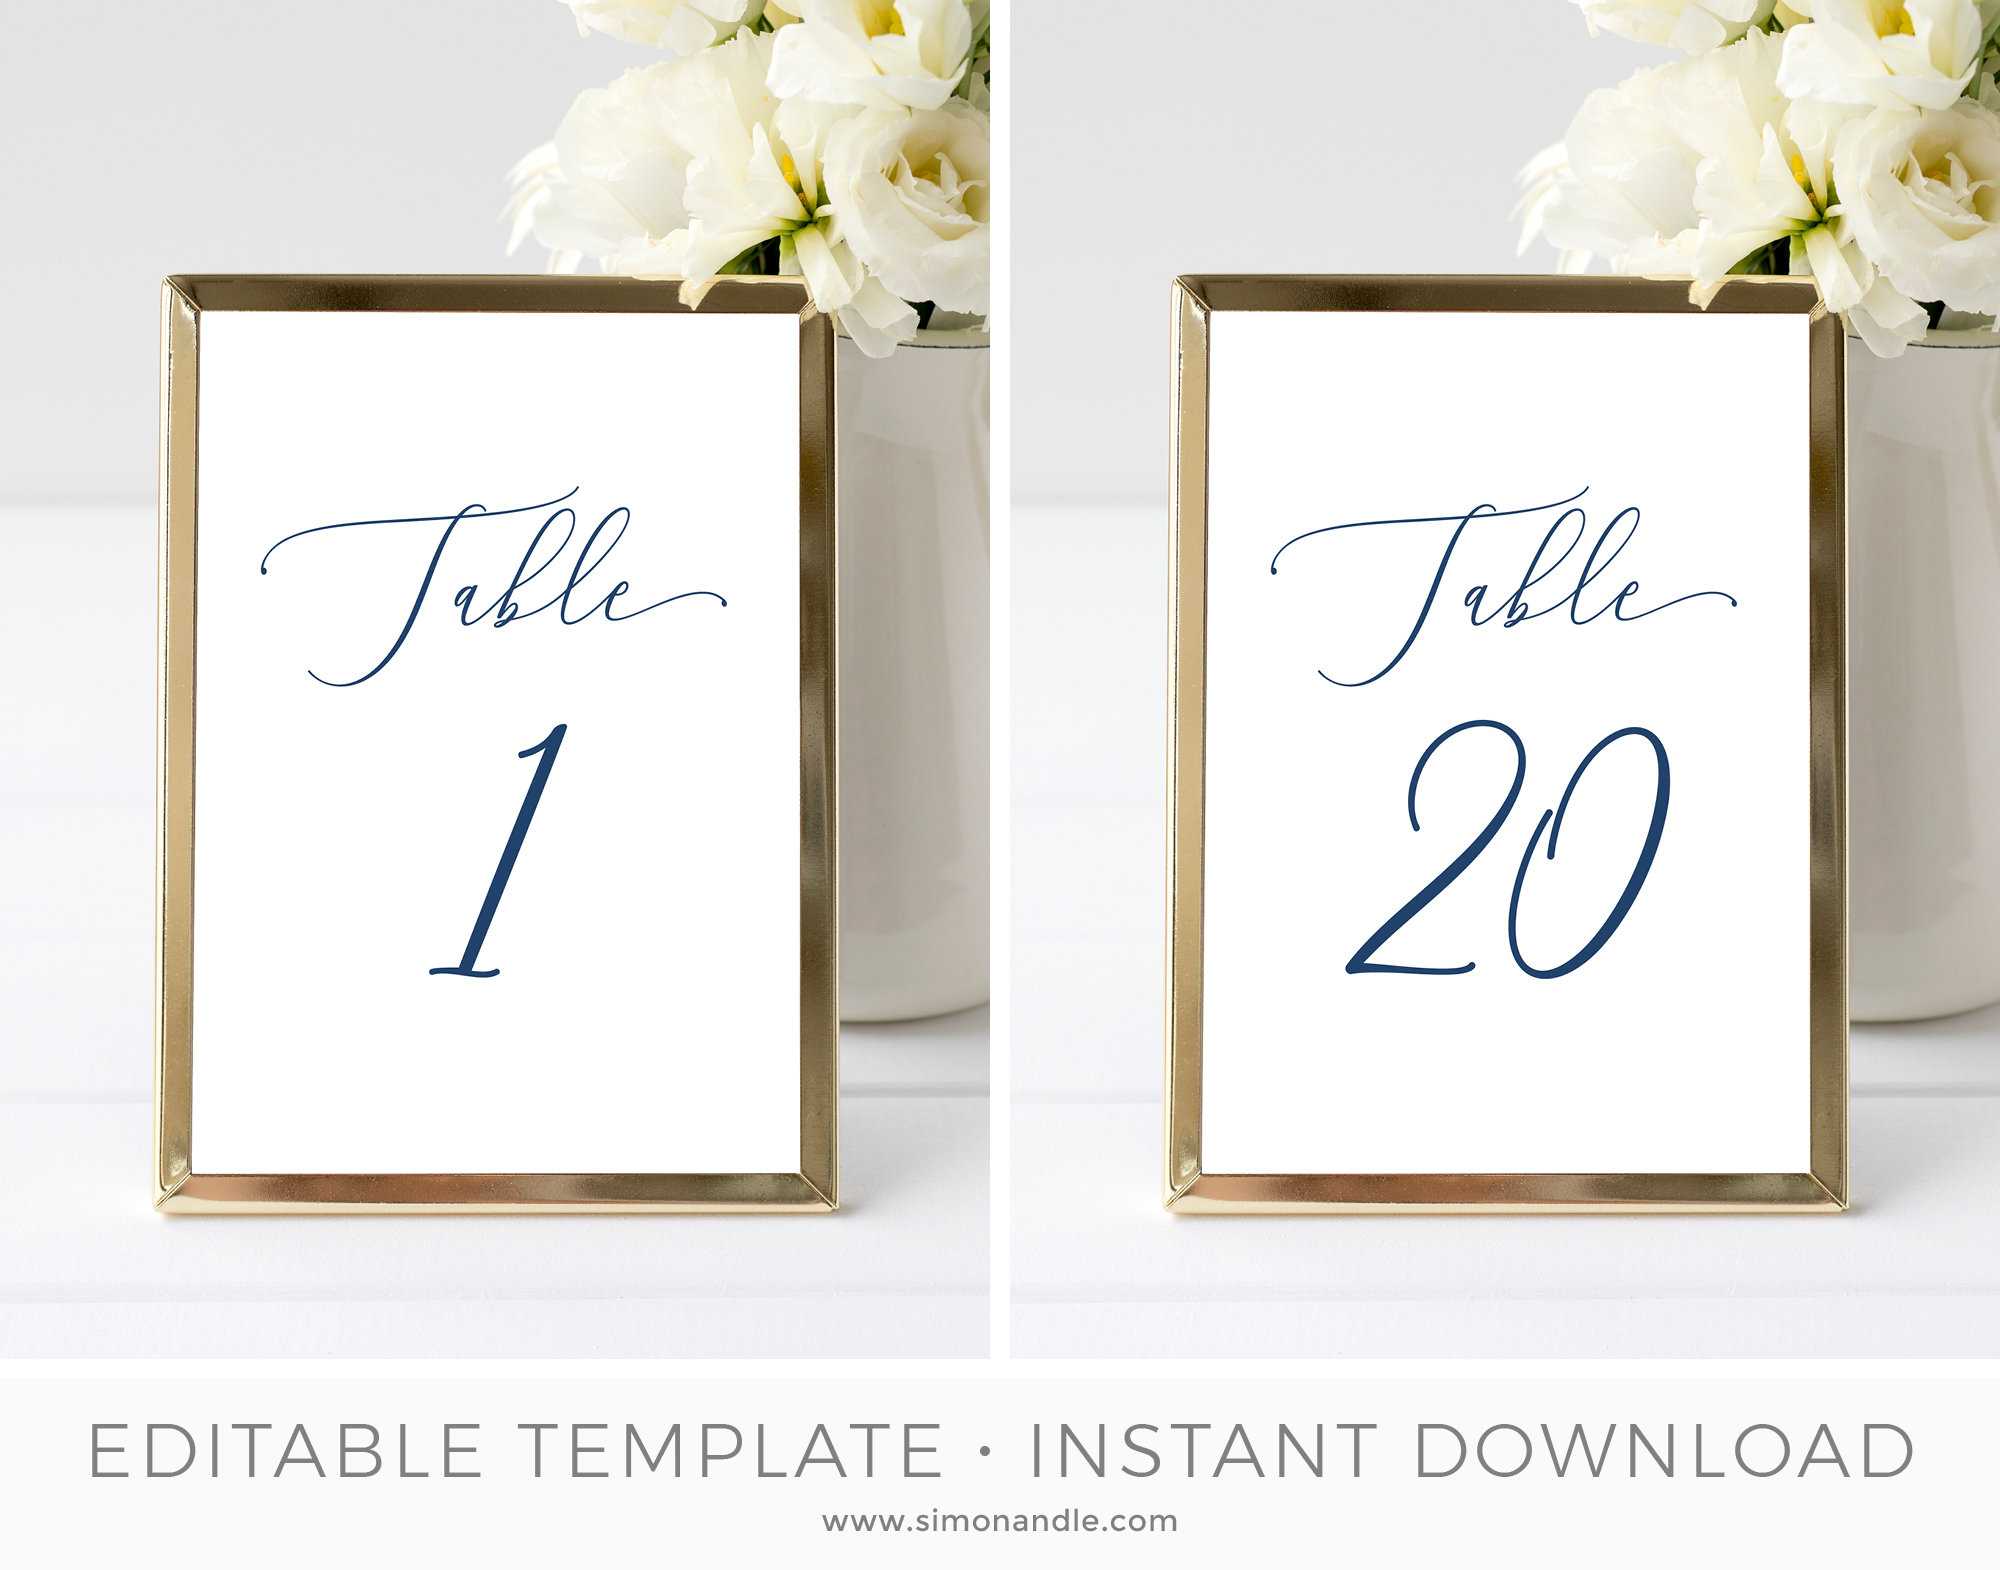 Table Number Card Template, Table Seating Cards, Hamptons Wedding Table  Setting, Beach Wedding, Editable, Printable | Instant Download Inside Table Number Cards Template